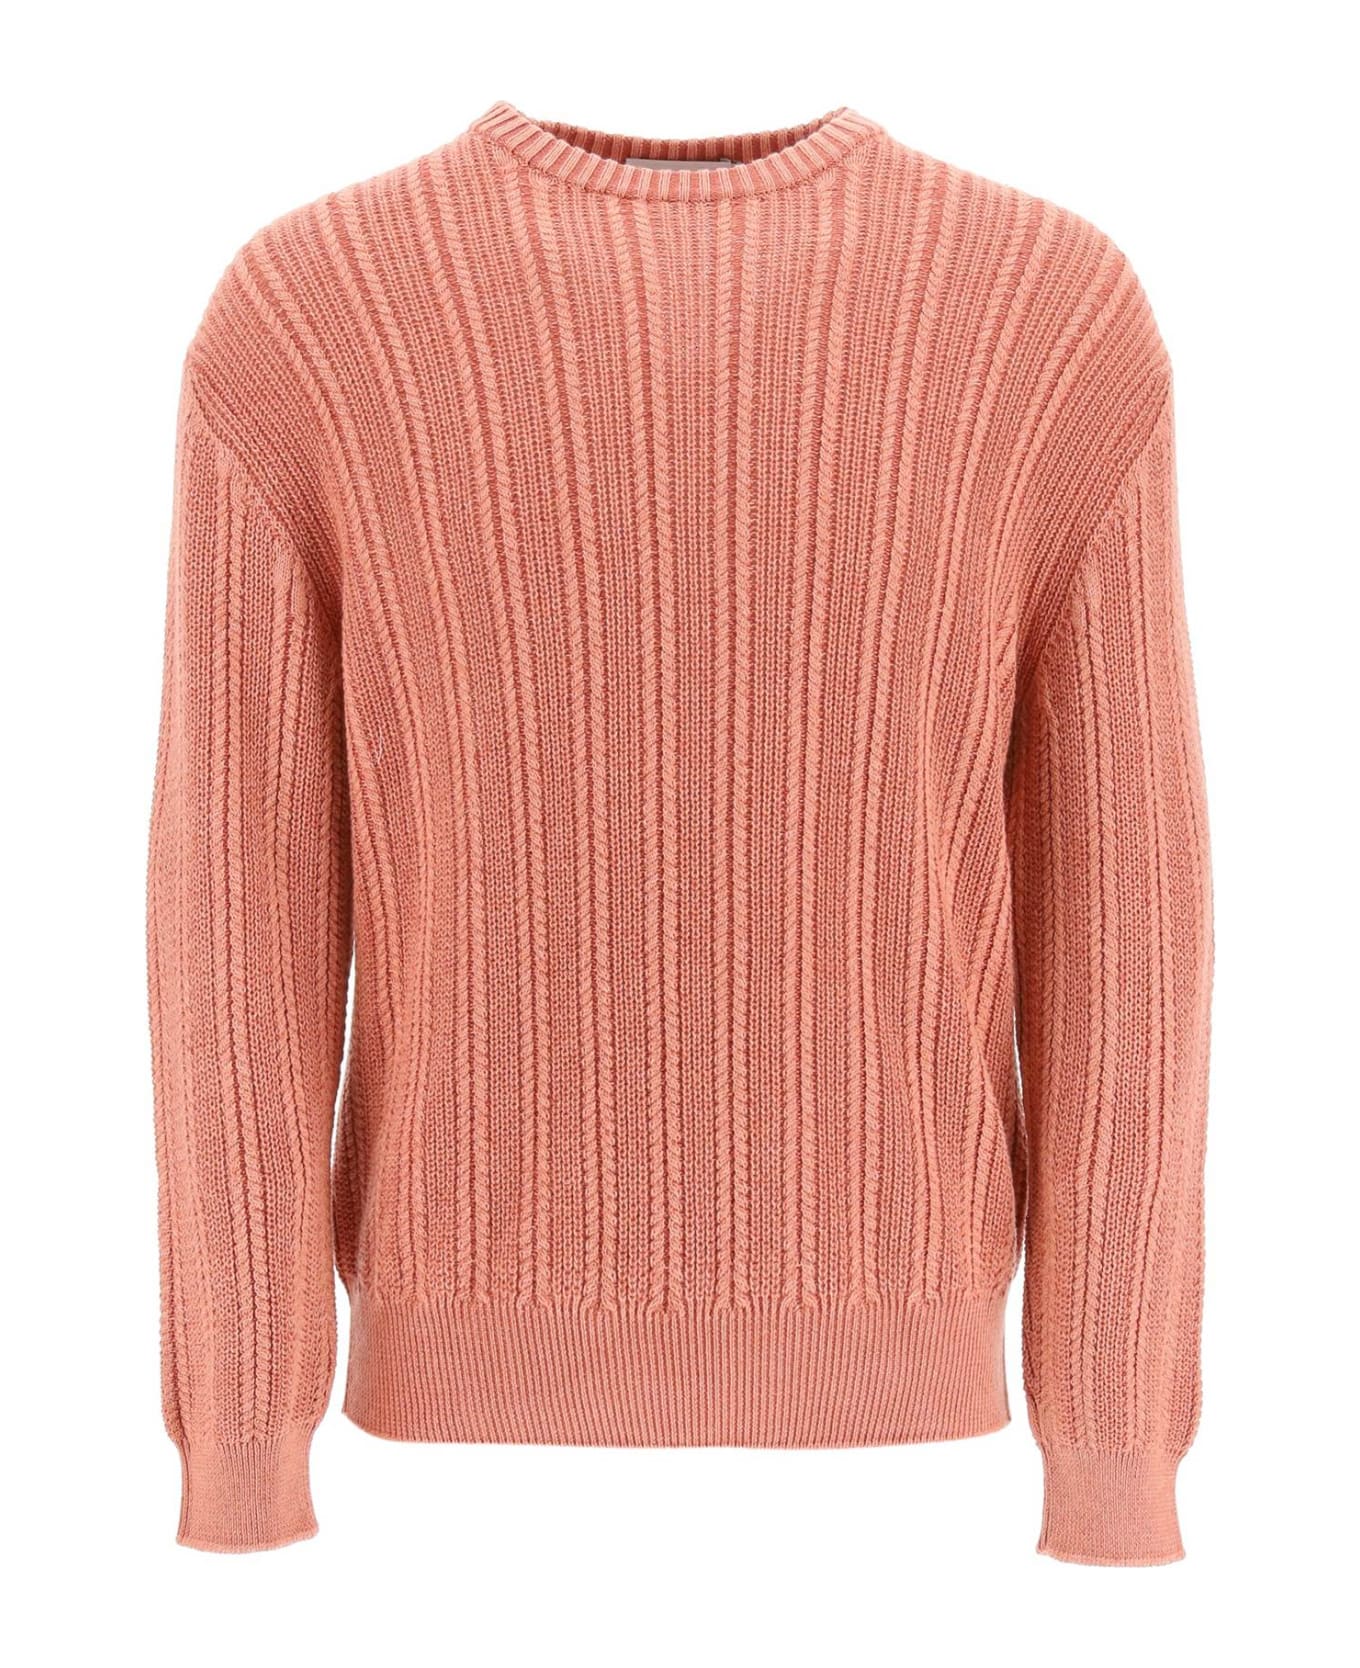 Agnona Cashmere, Silk And Cotton Sweater - CORAL (Pink)